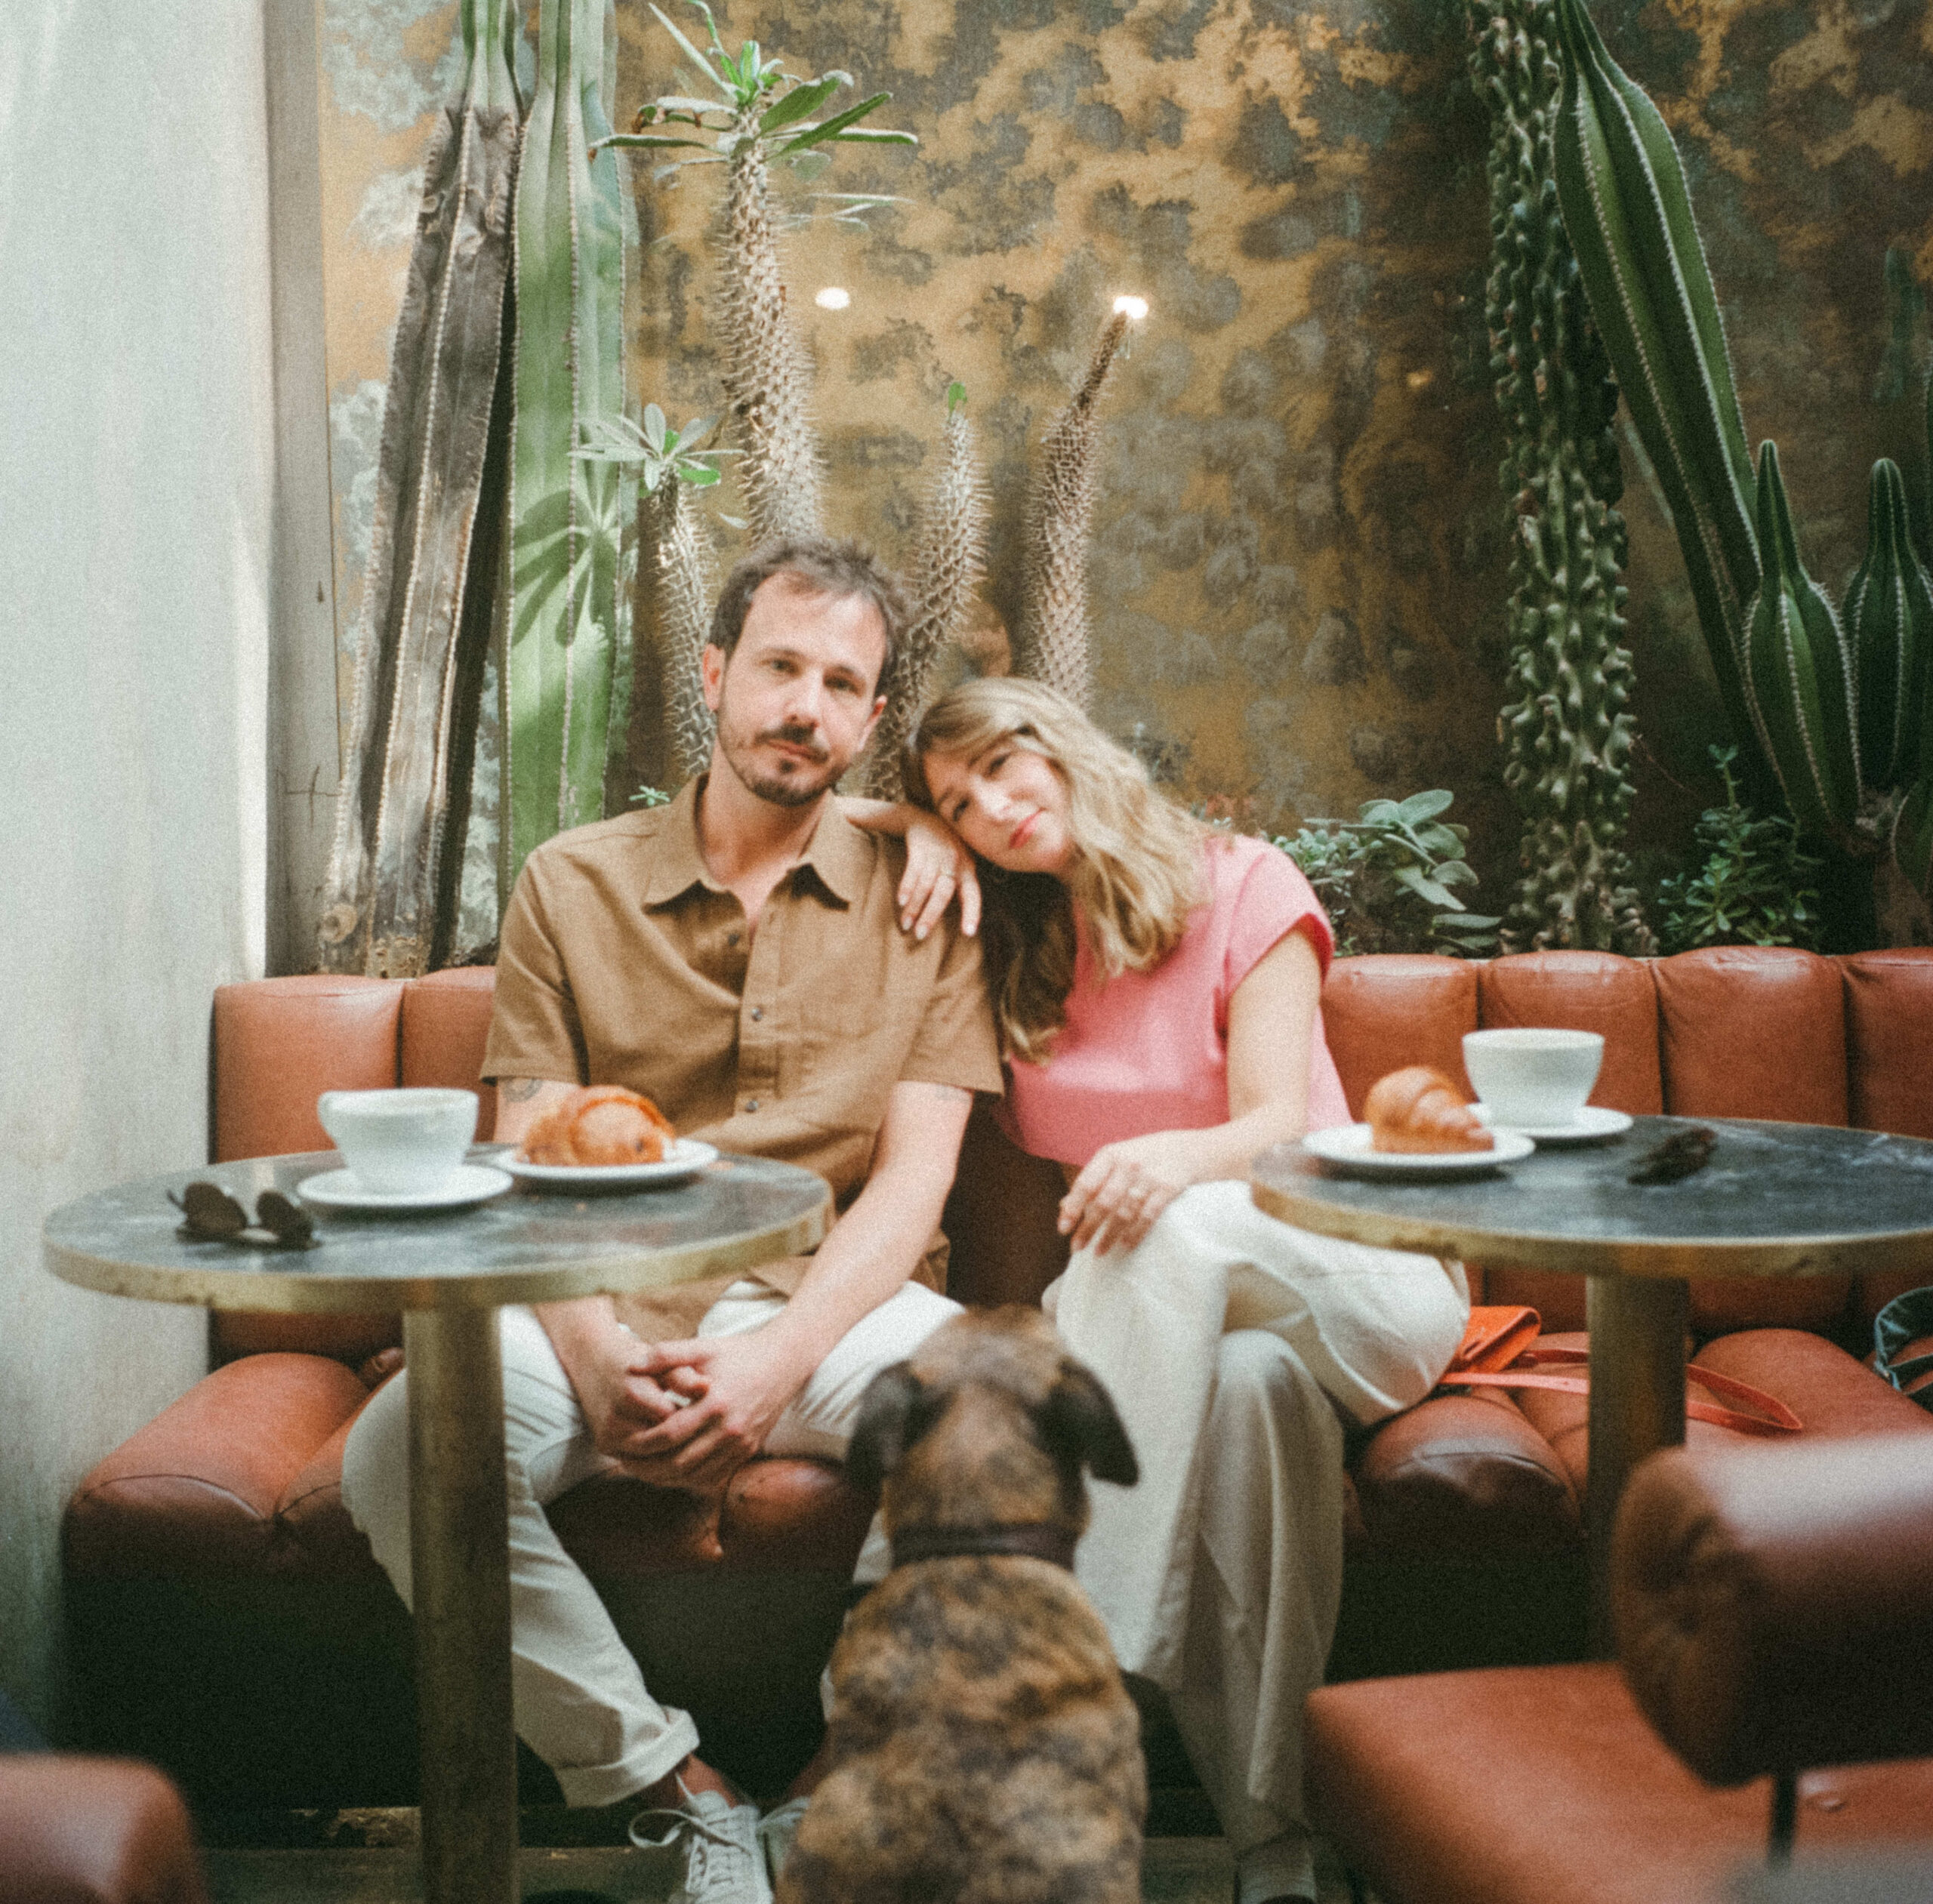 film photography with man and woman eating croissants while their dog is looking at them